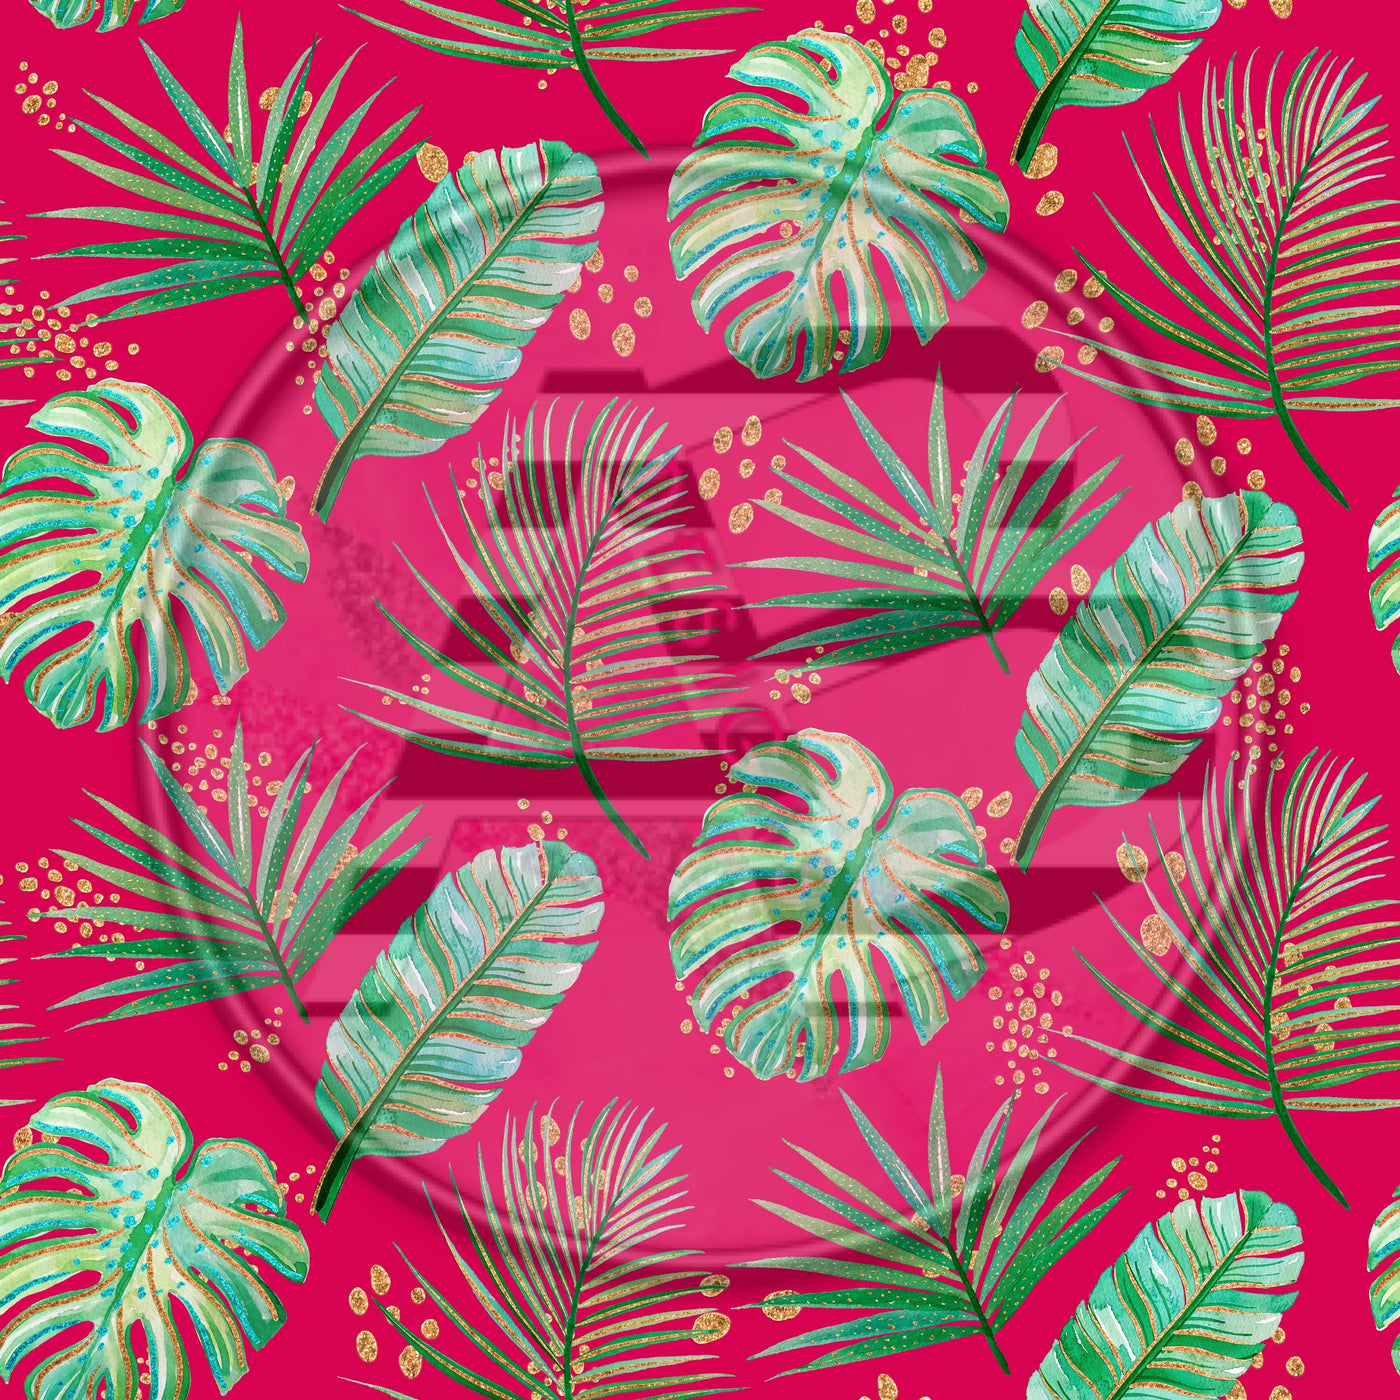 Adhesive Patterned Vinyl - Tropical 712